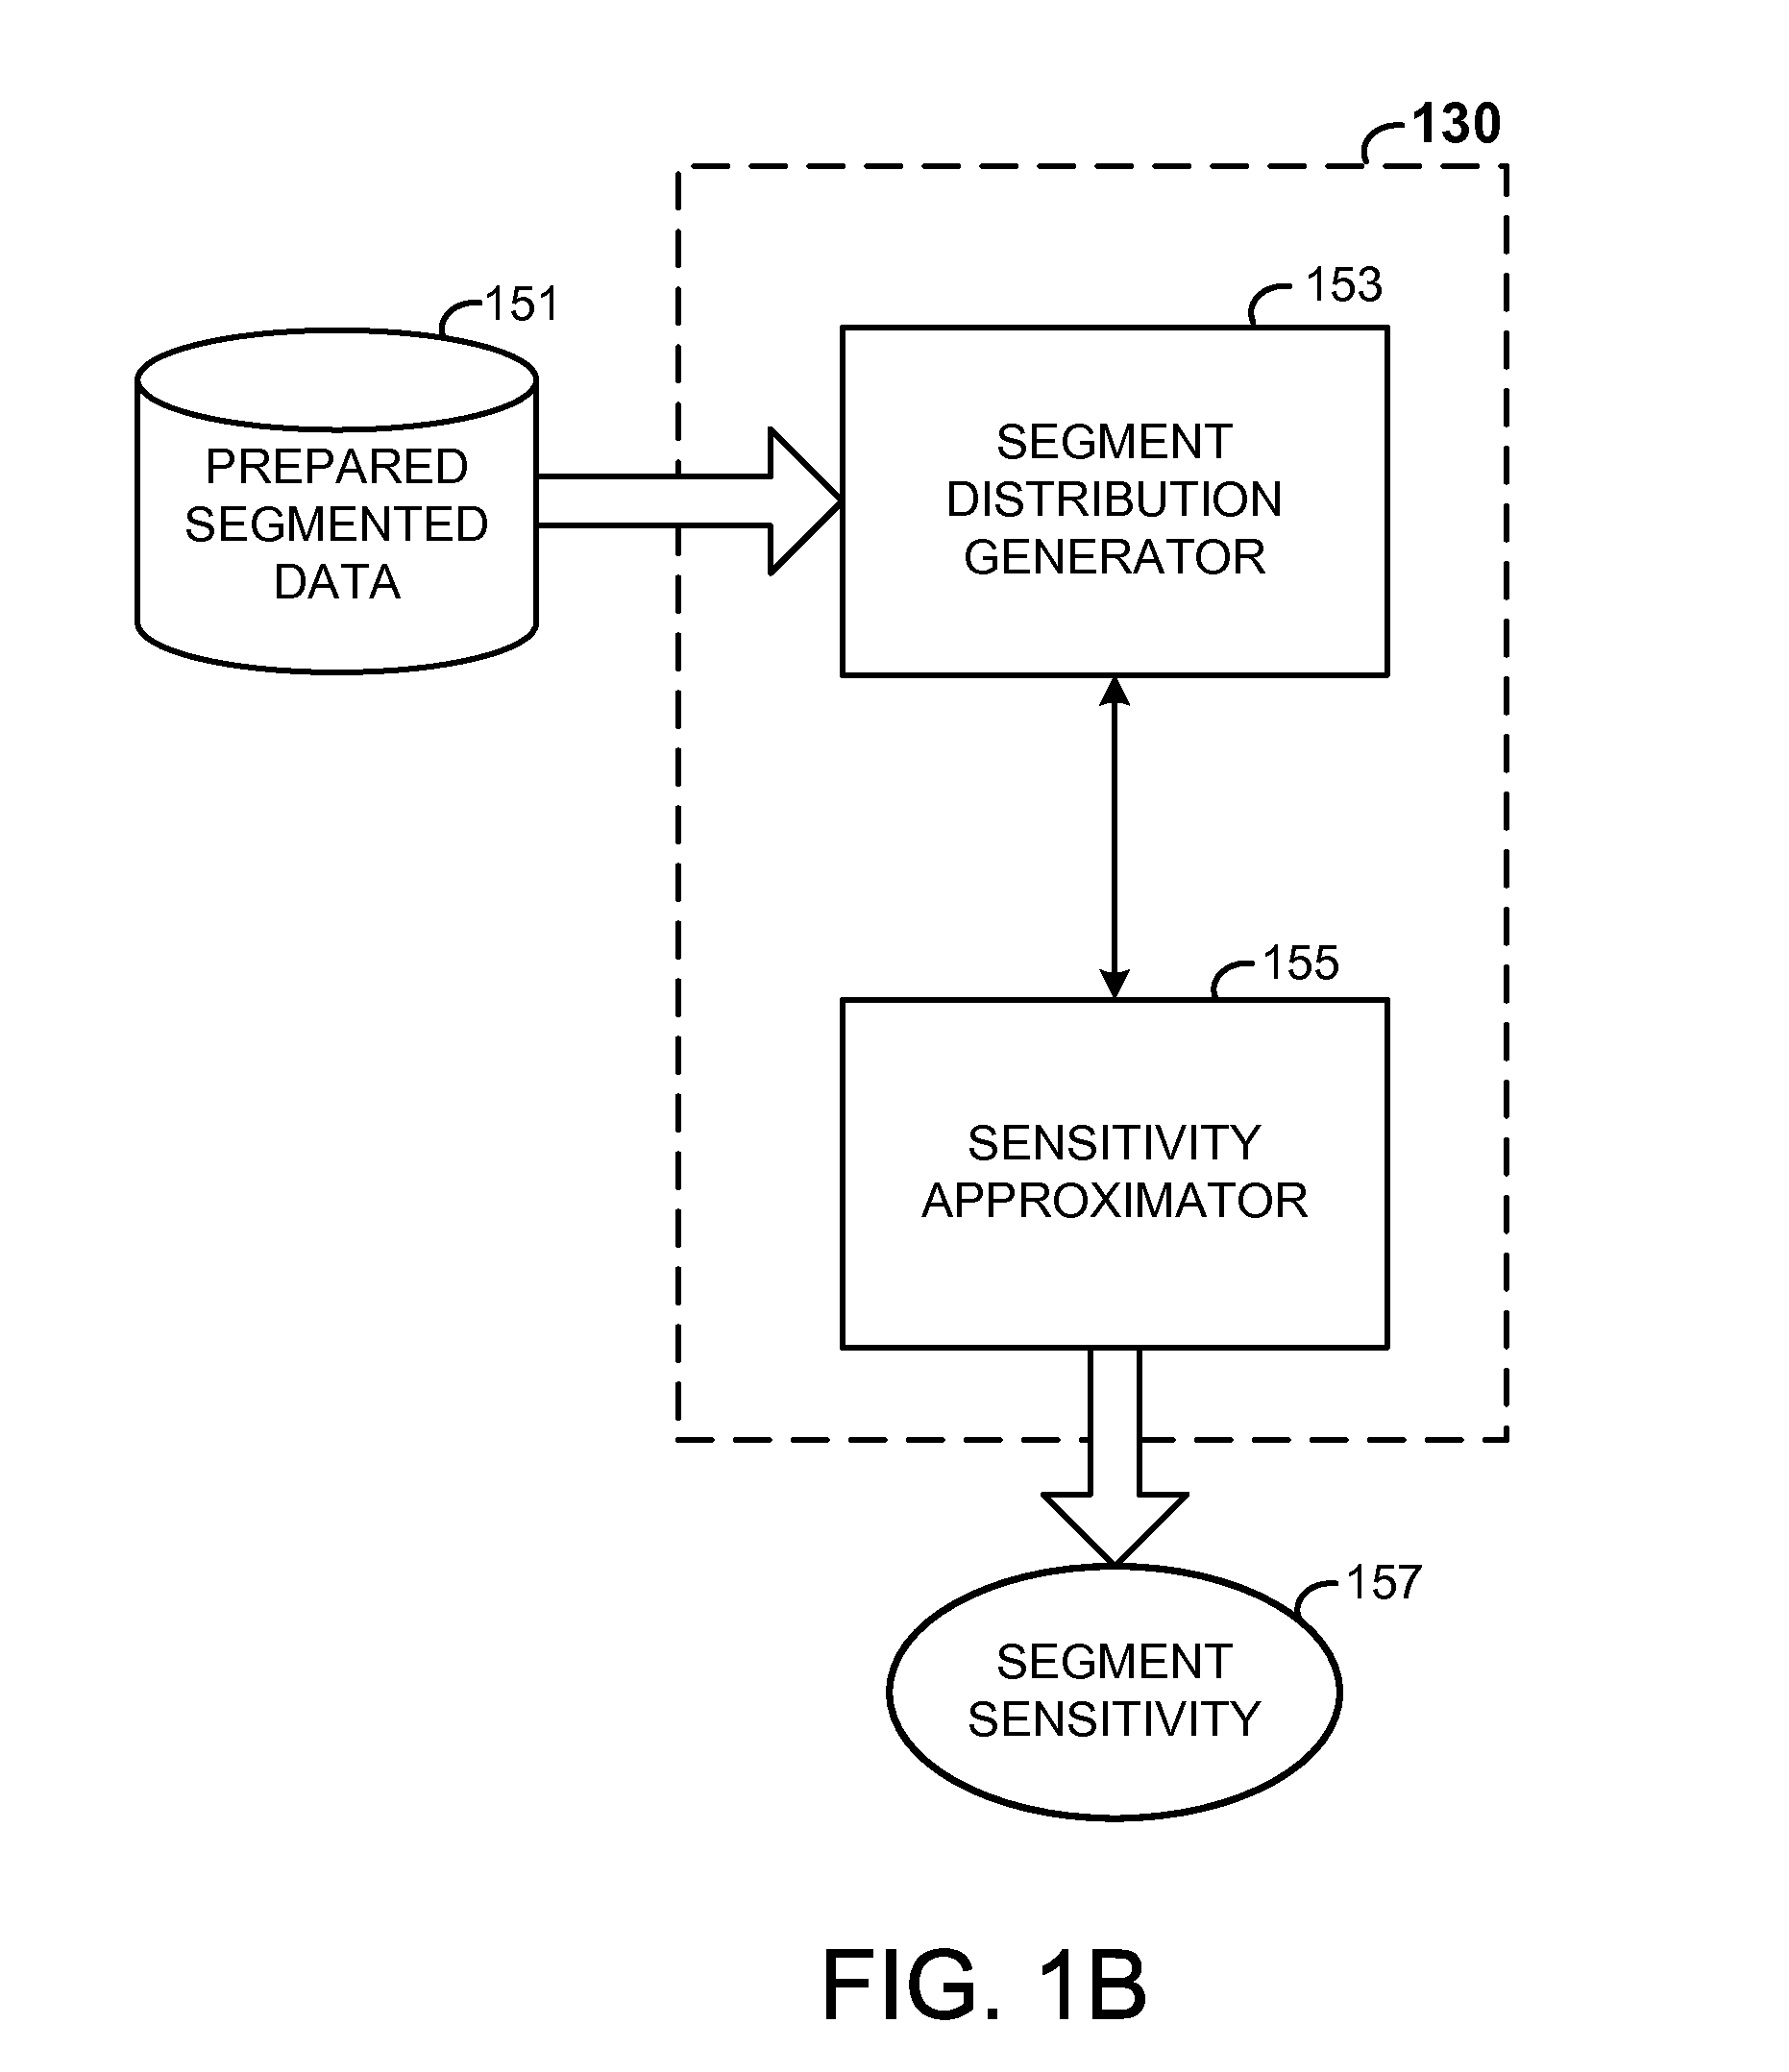 System and Methods for Generating Price Sensitivity